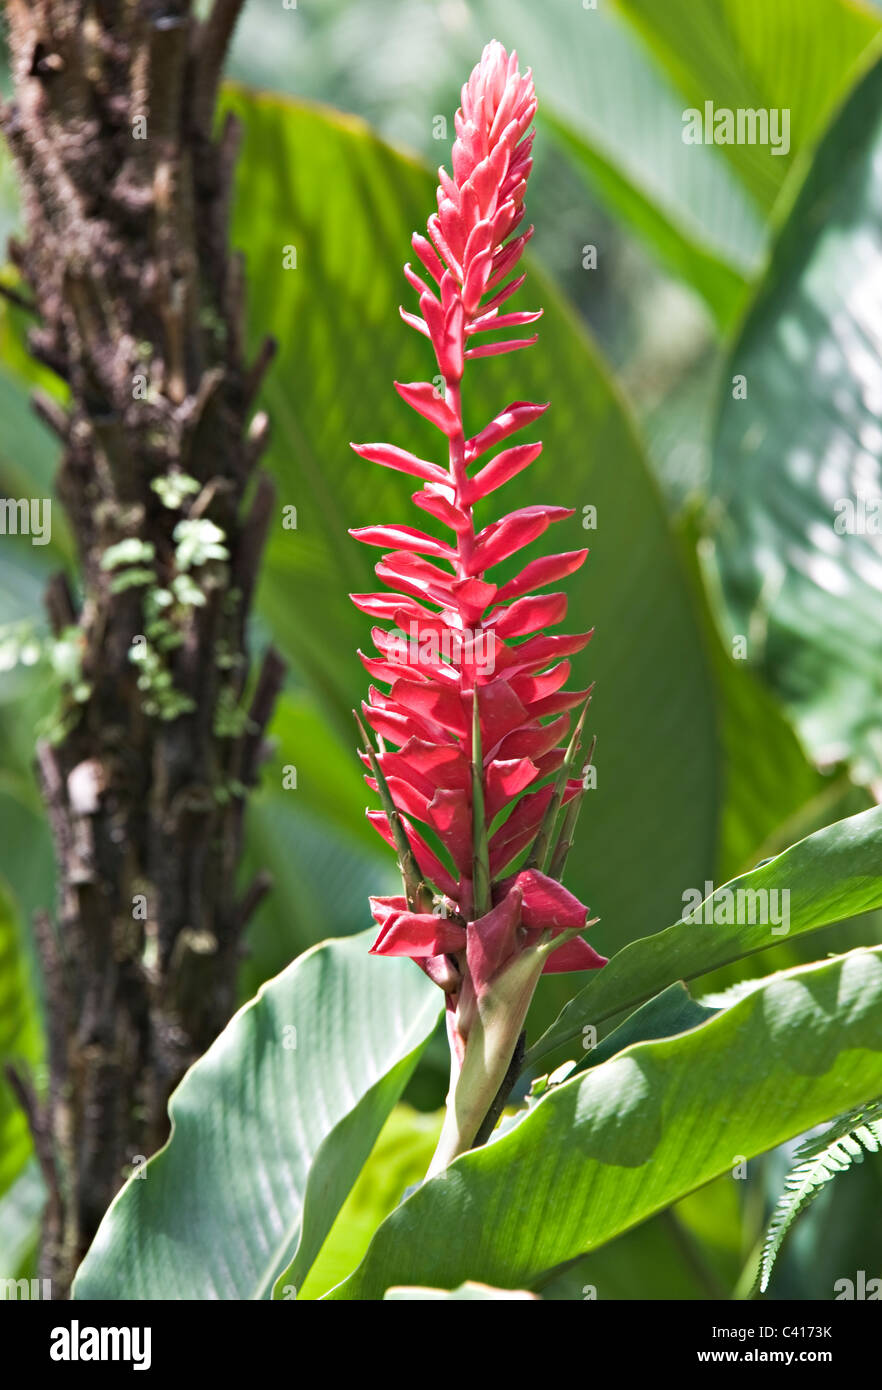 A Red Upright Flowering Ginger Plant in Bloom in Singapore Botanic Gardens Republic of Singapore Asia Stock Photo